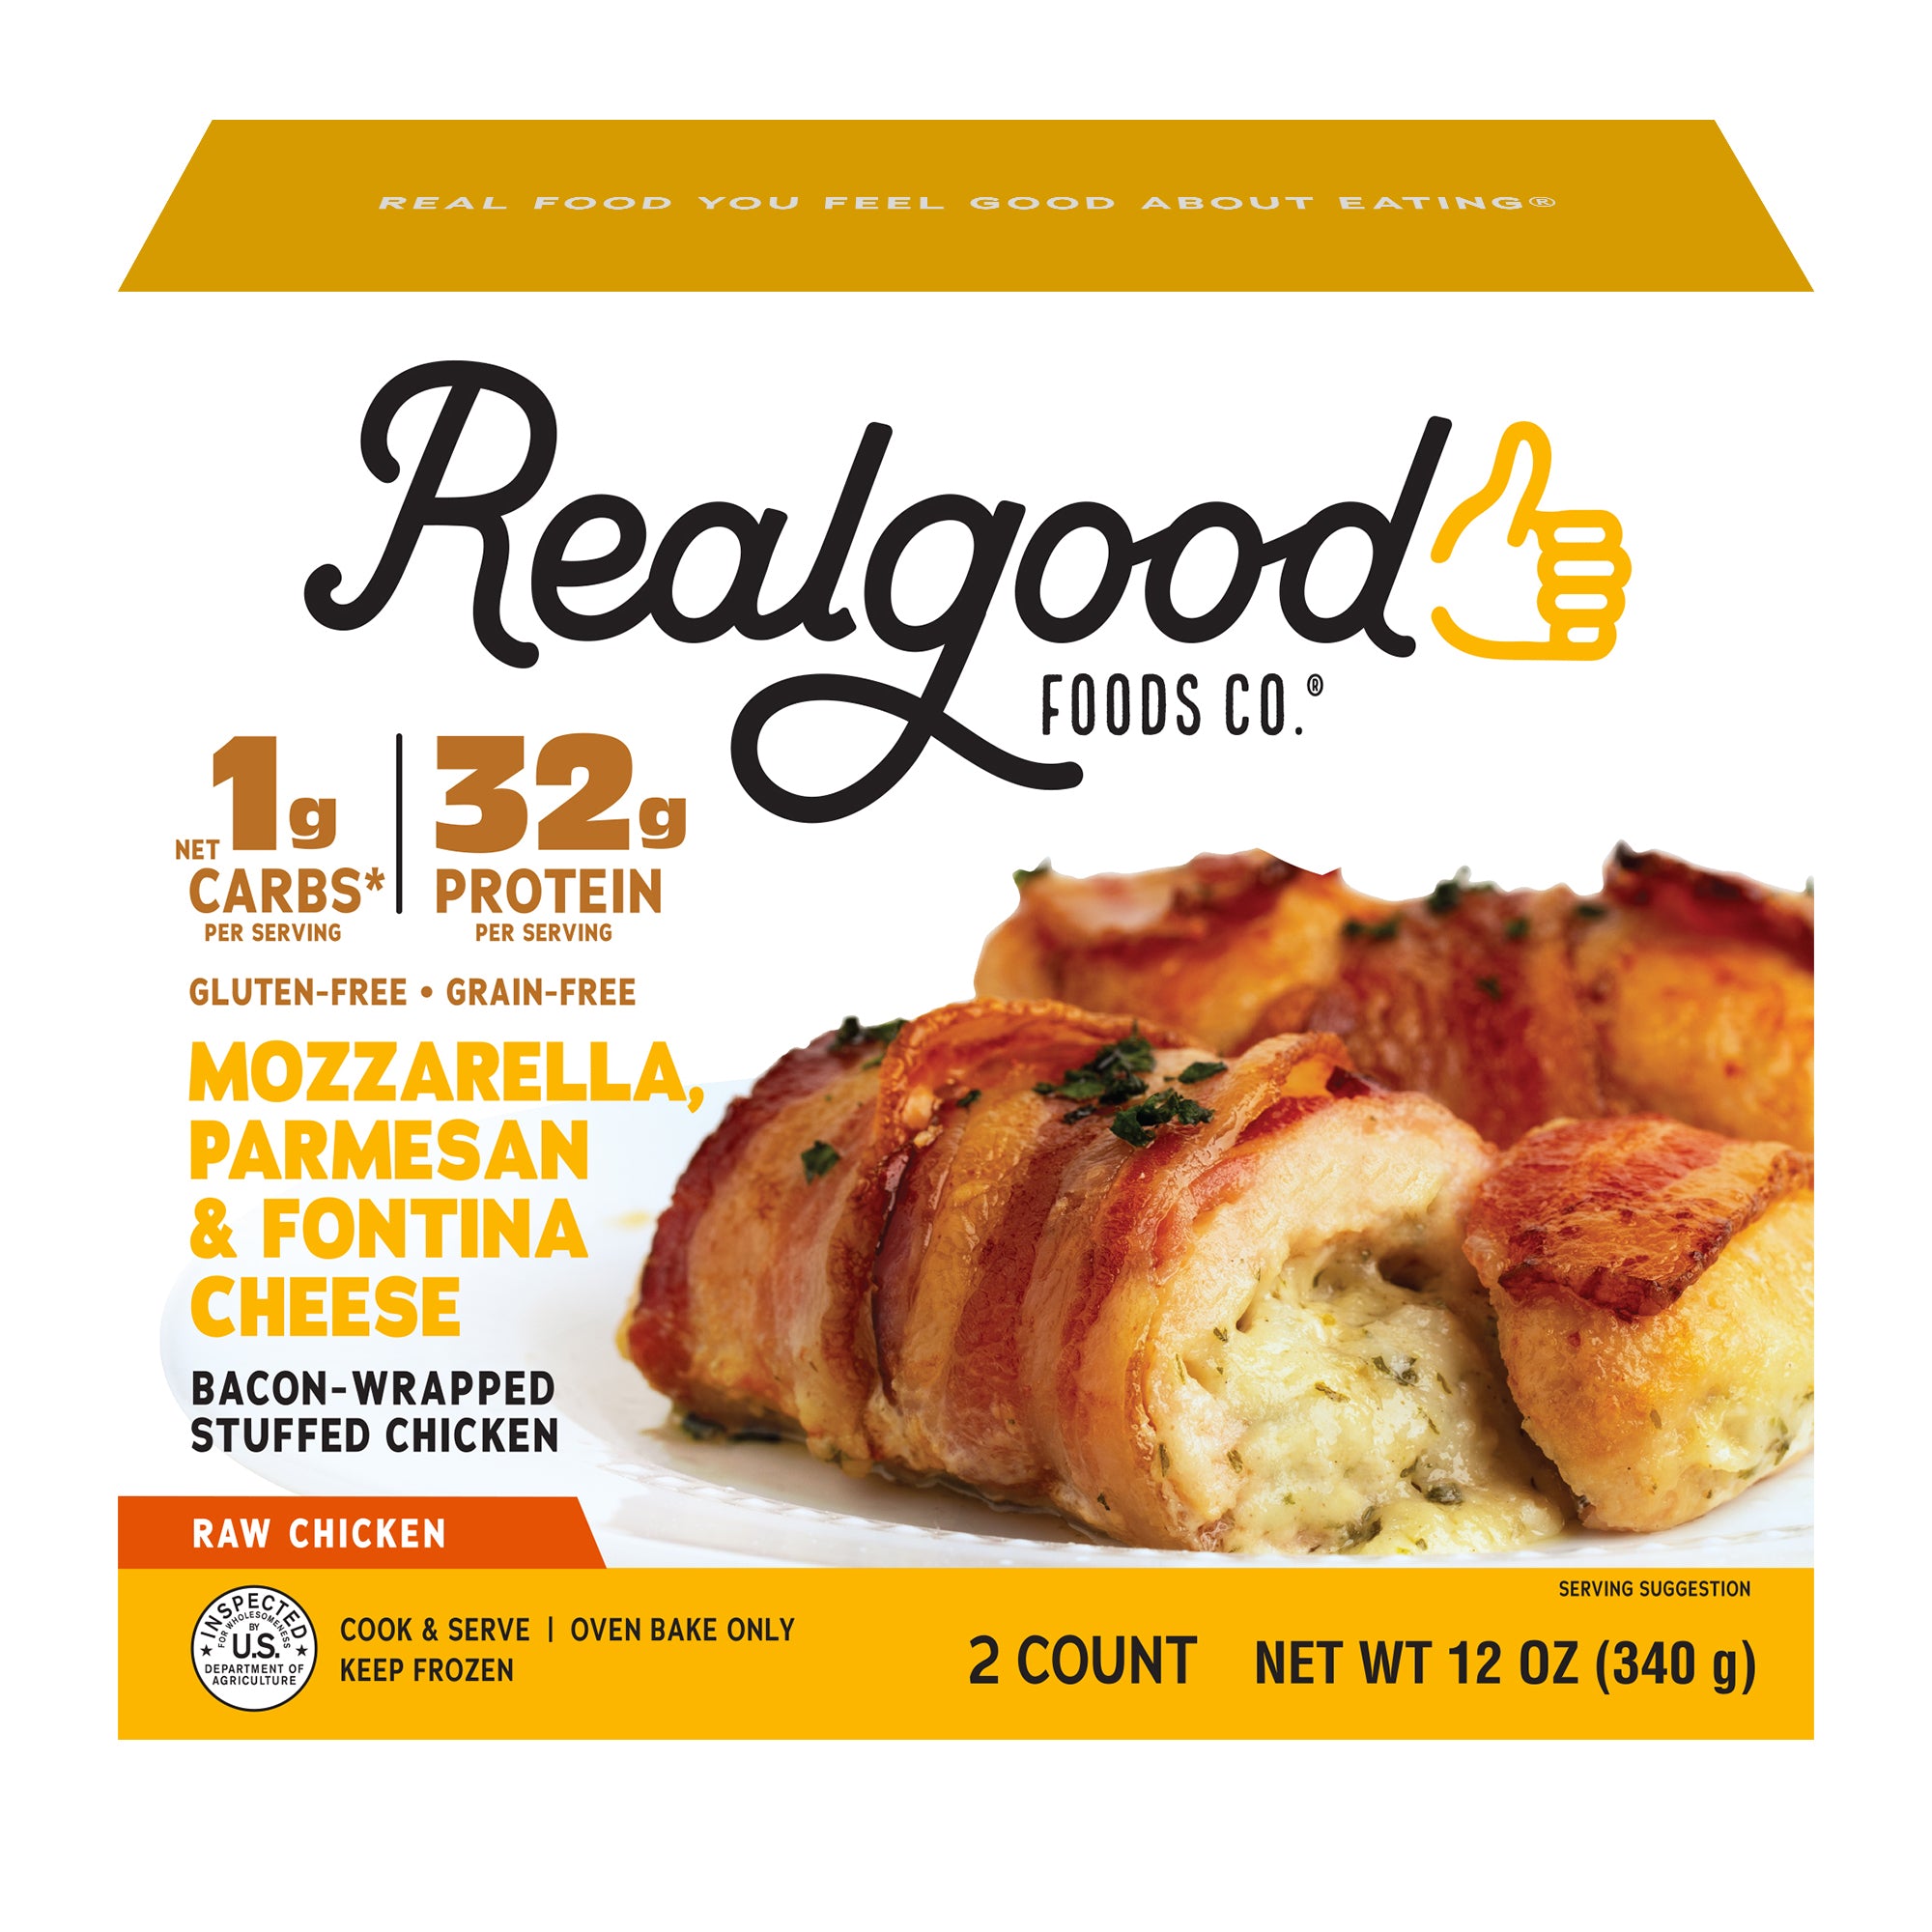 A Review of Real Good Stuffed Chicken - HubPages